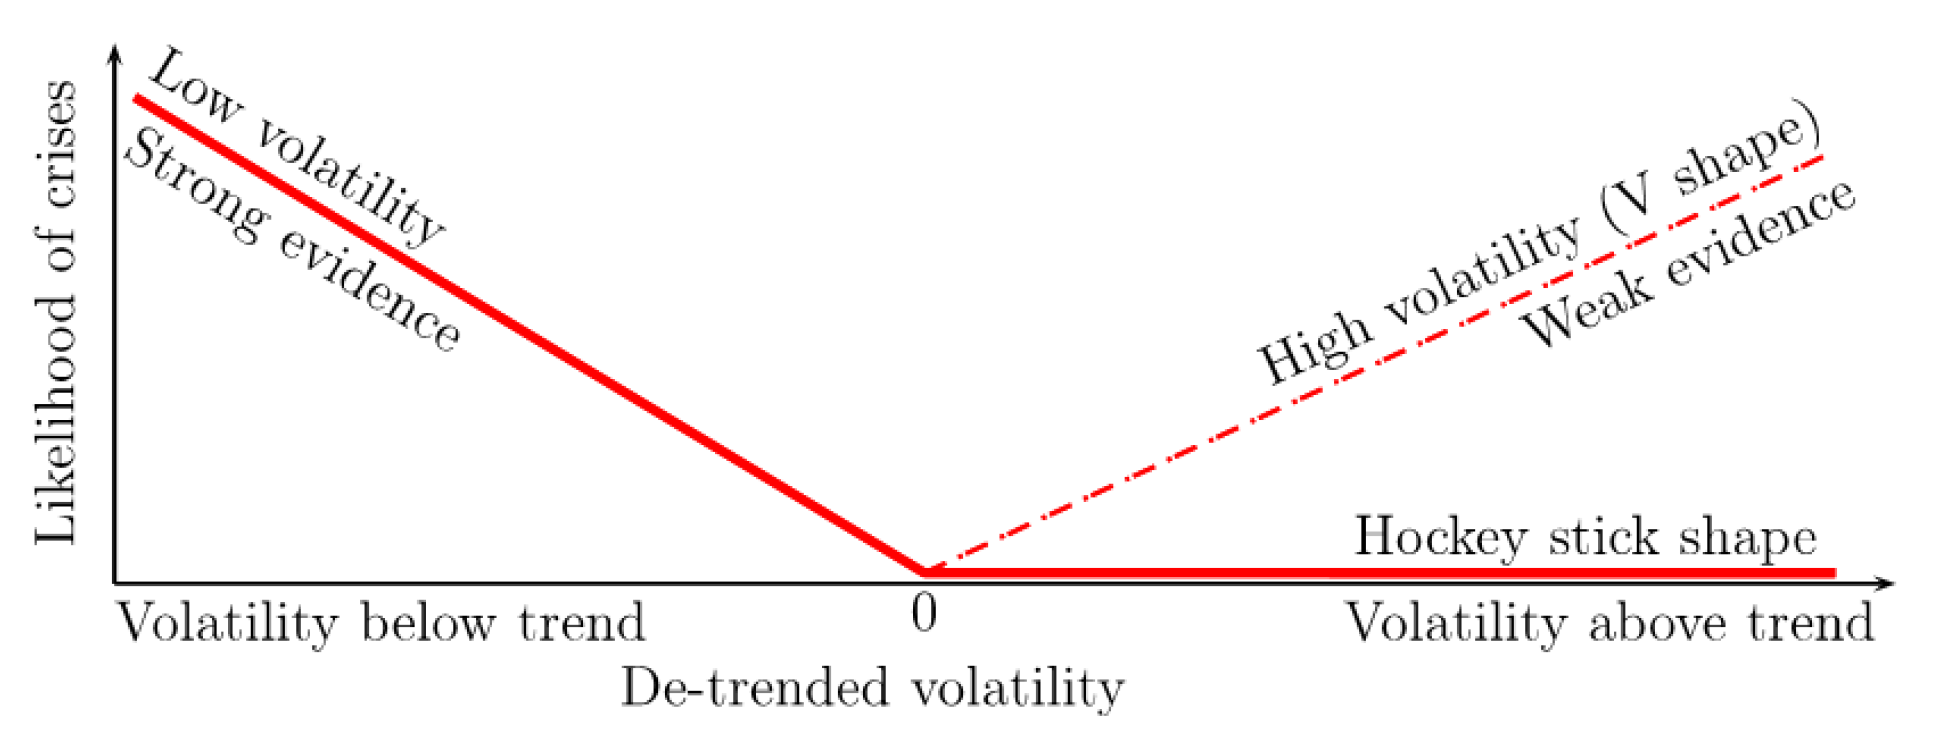 Figure 3. Low and high volatilities as predictors of crises. See accessible link for data description.